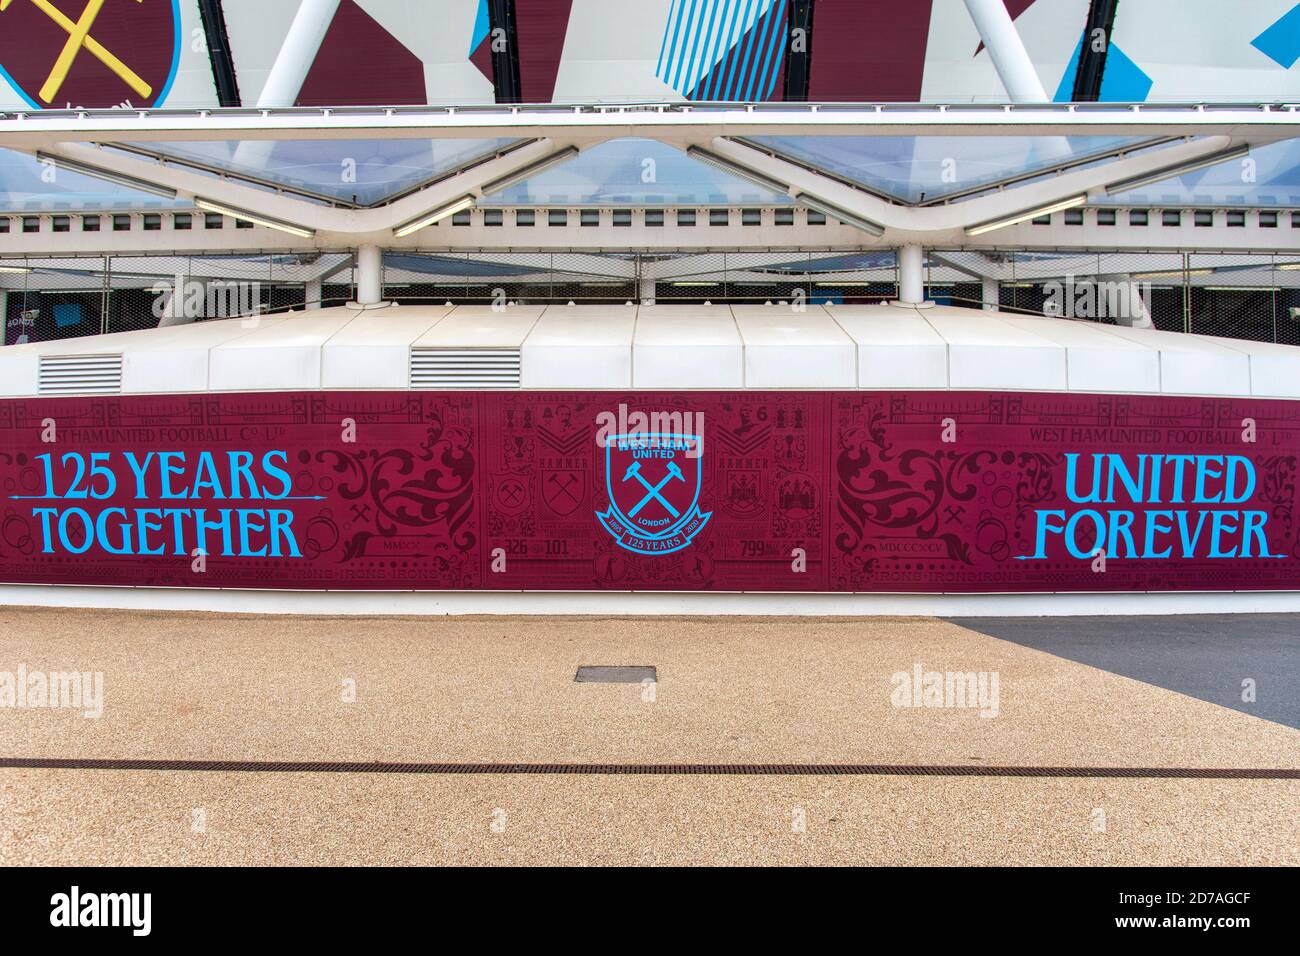 A sign on the London Stadium reading '125 years together and 'United Forever' at the home of West Ham United Football Club. Stock Photo